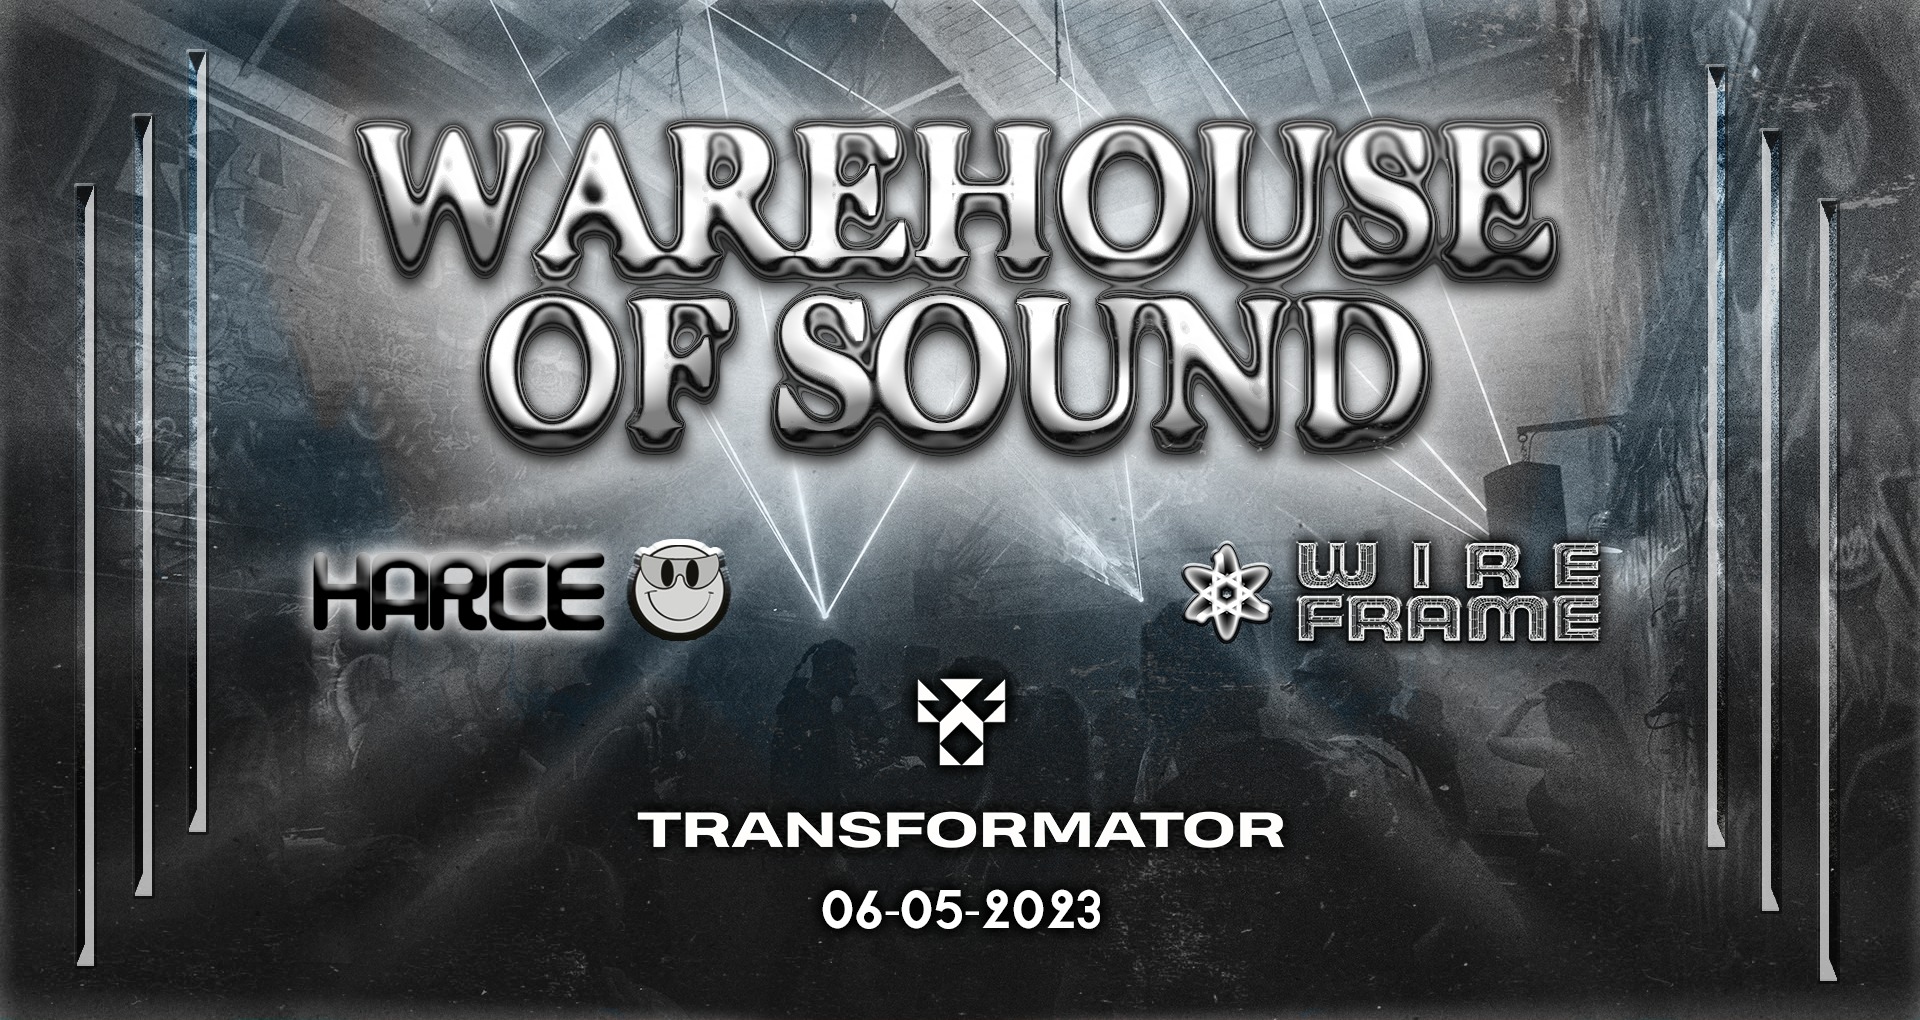 WAREHOUSE OF SOUND [Harce & Wireframe]